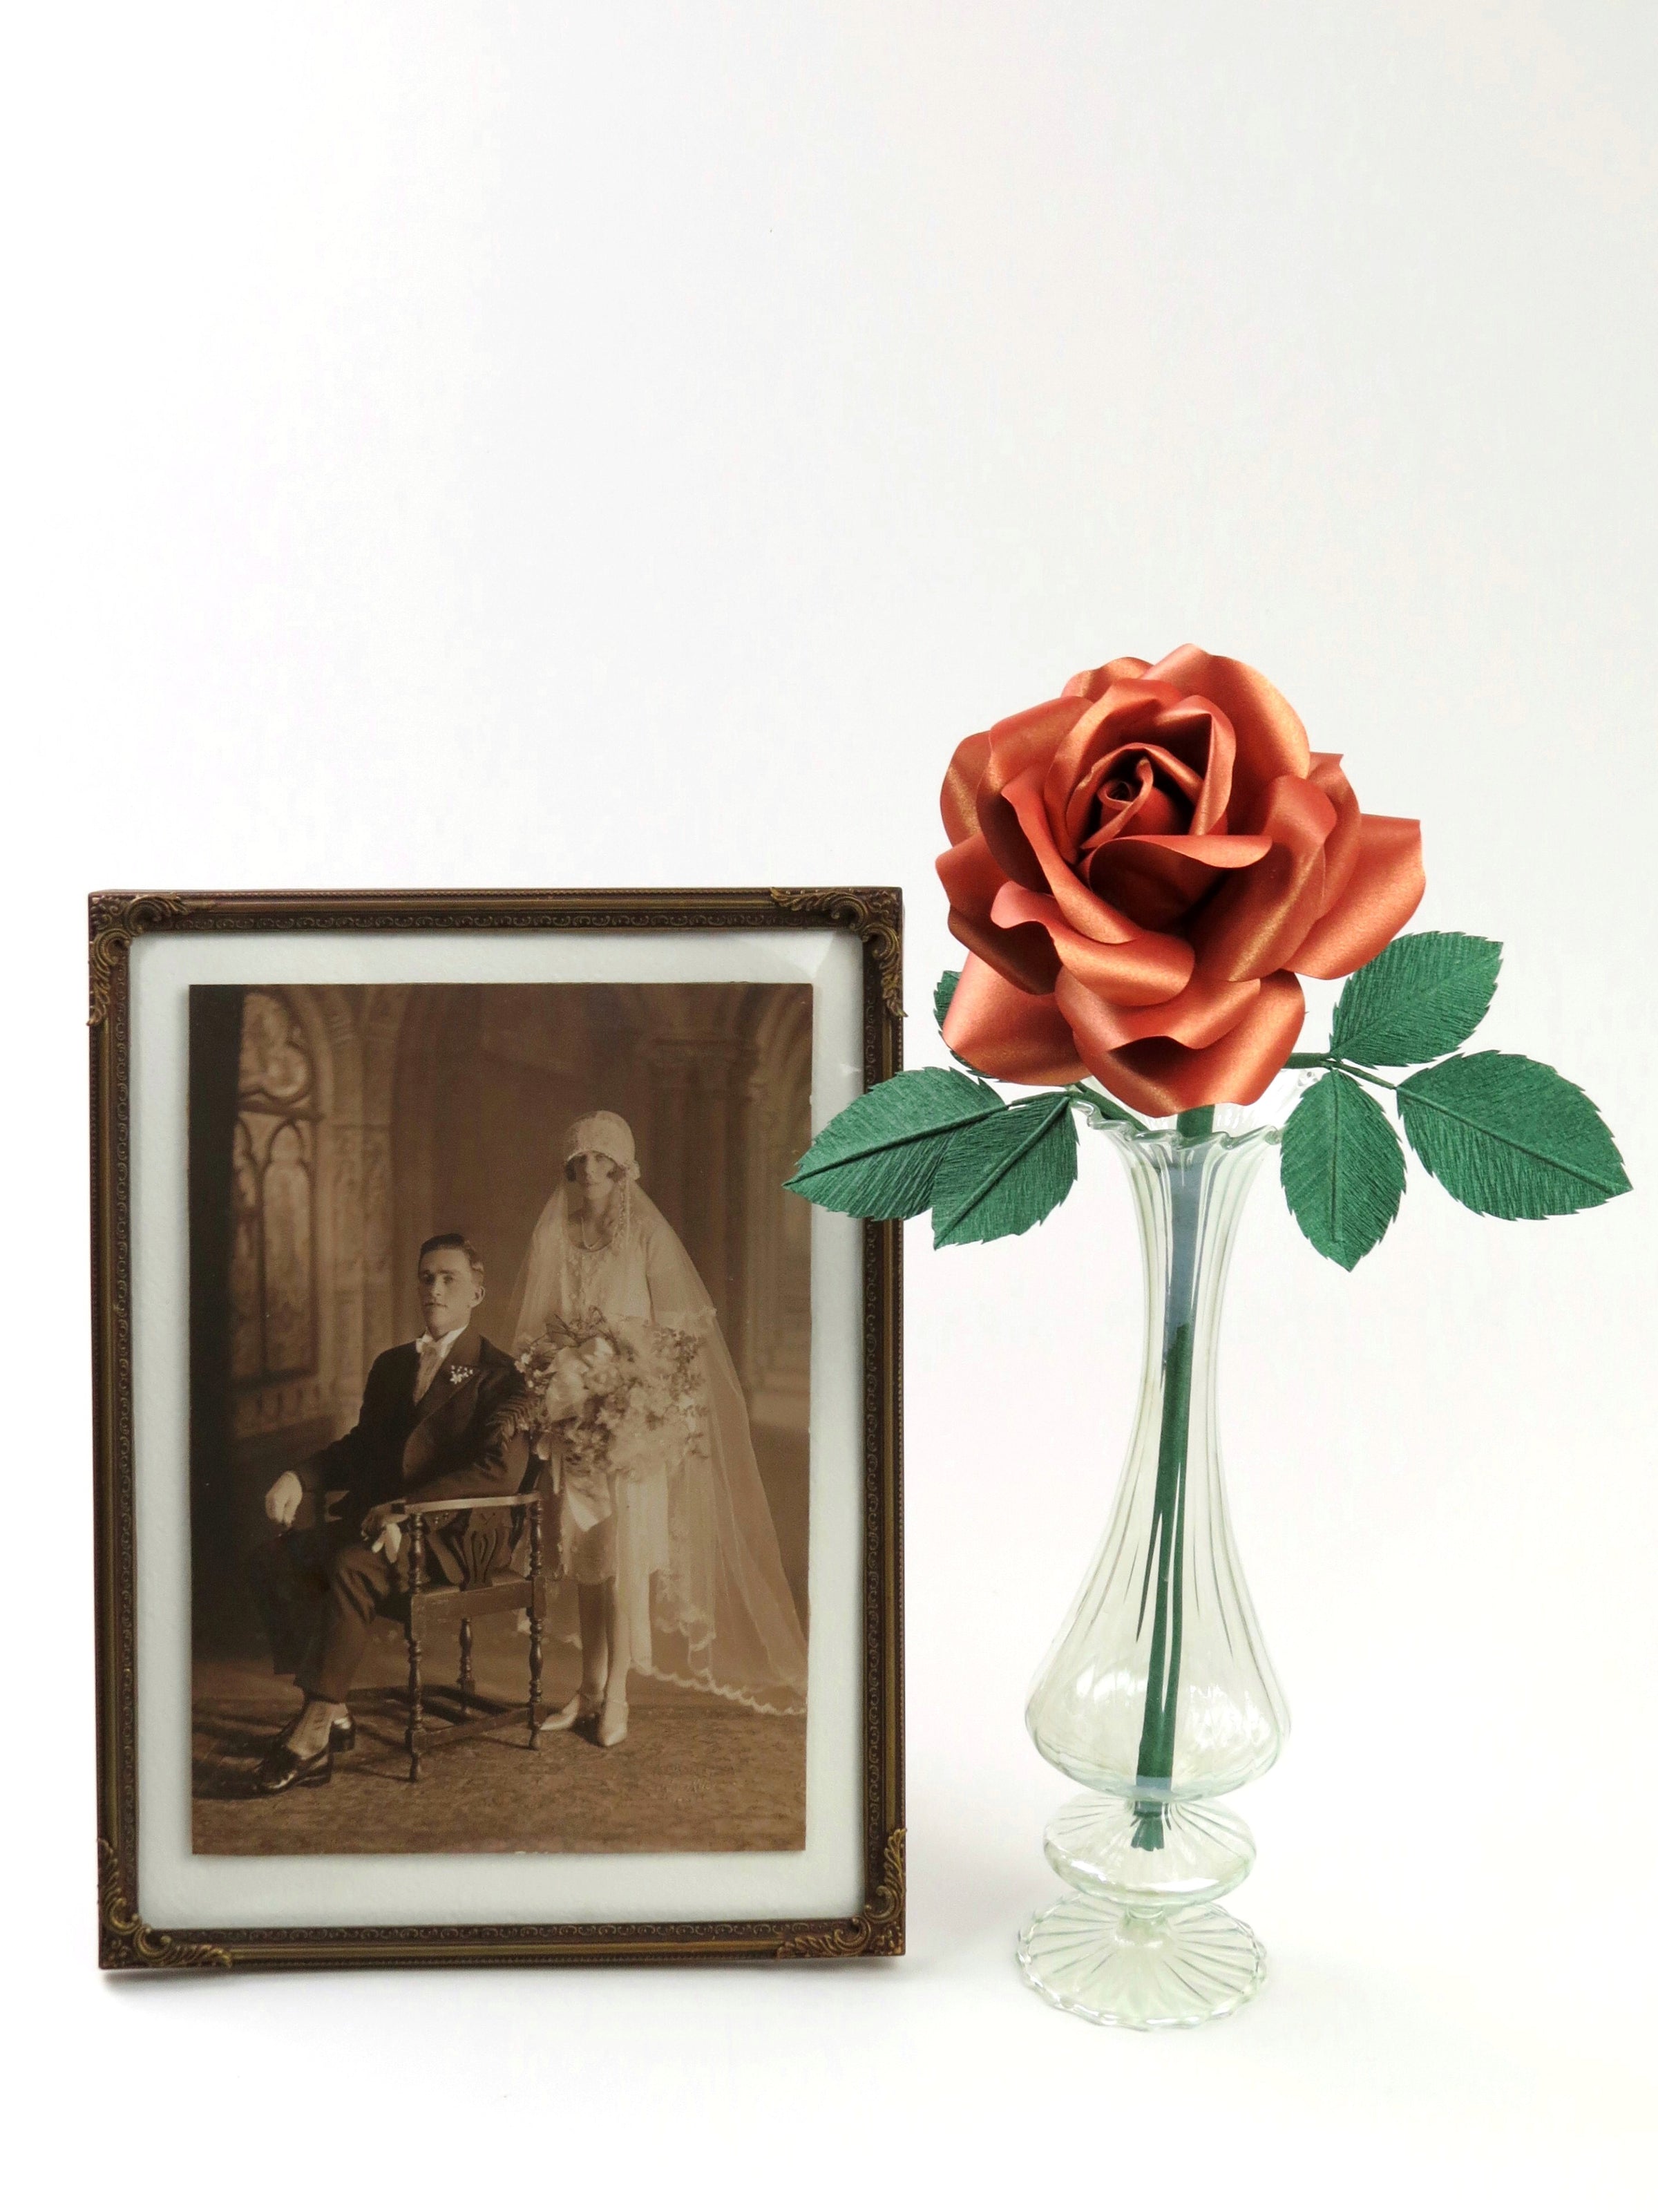 Copper paper rose with six green leaves standing in a slender glass vase with a framed vintage wedding photo of a 1920’s bride and groom standing to the left of the vase